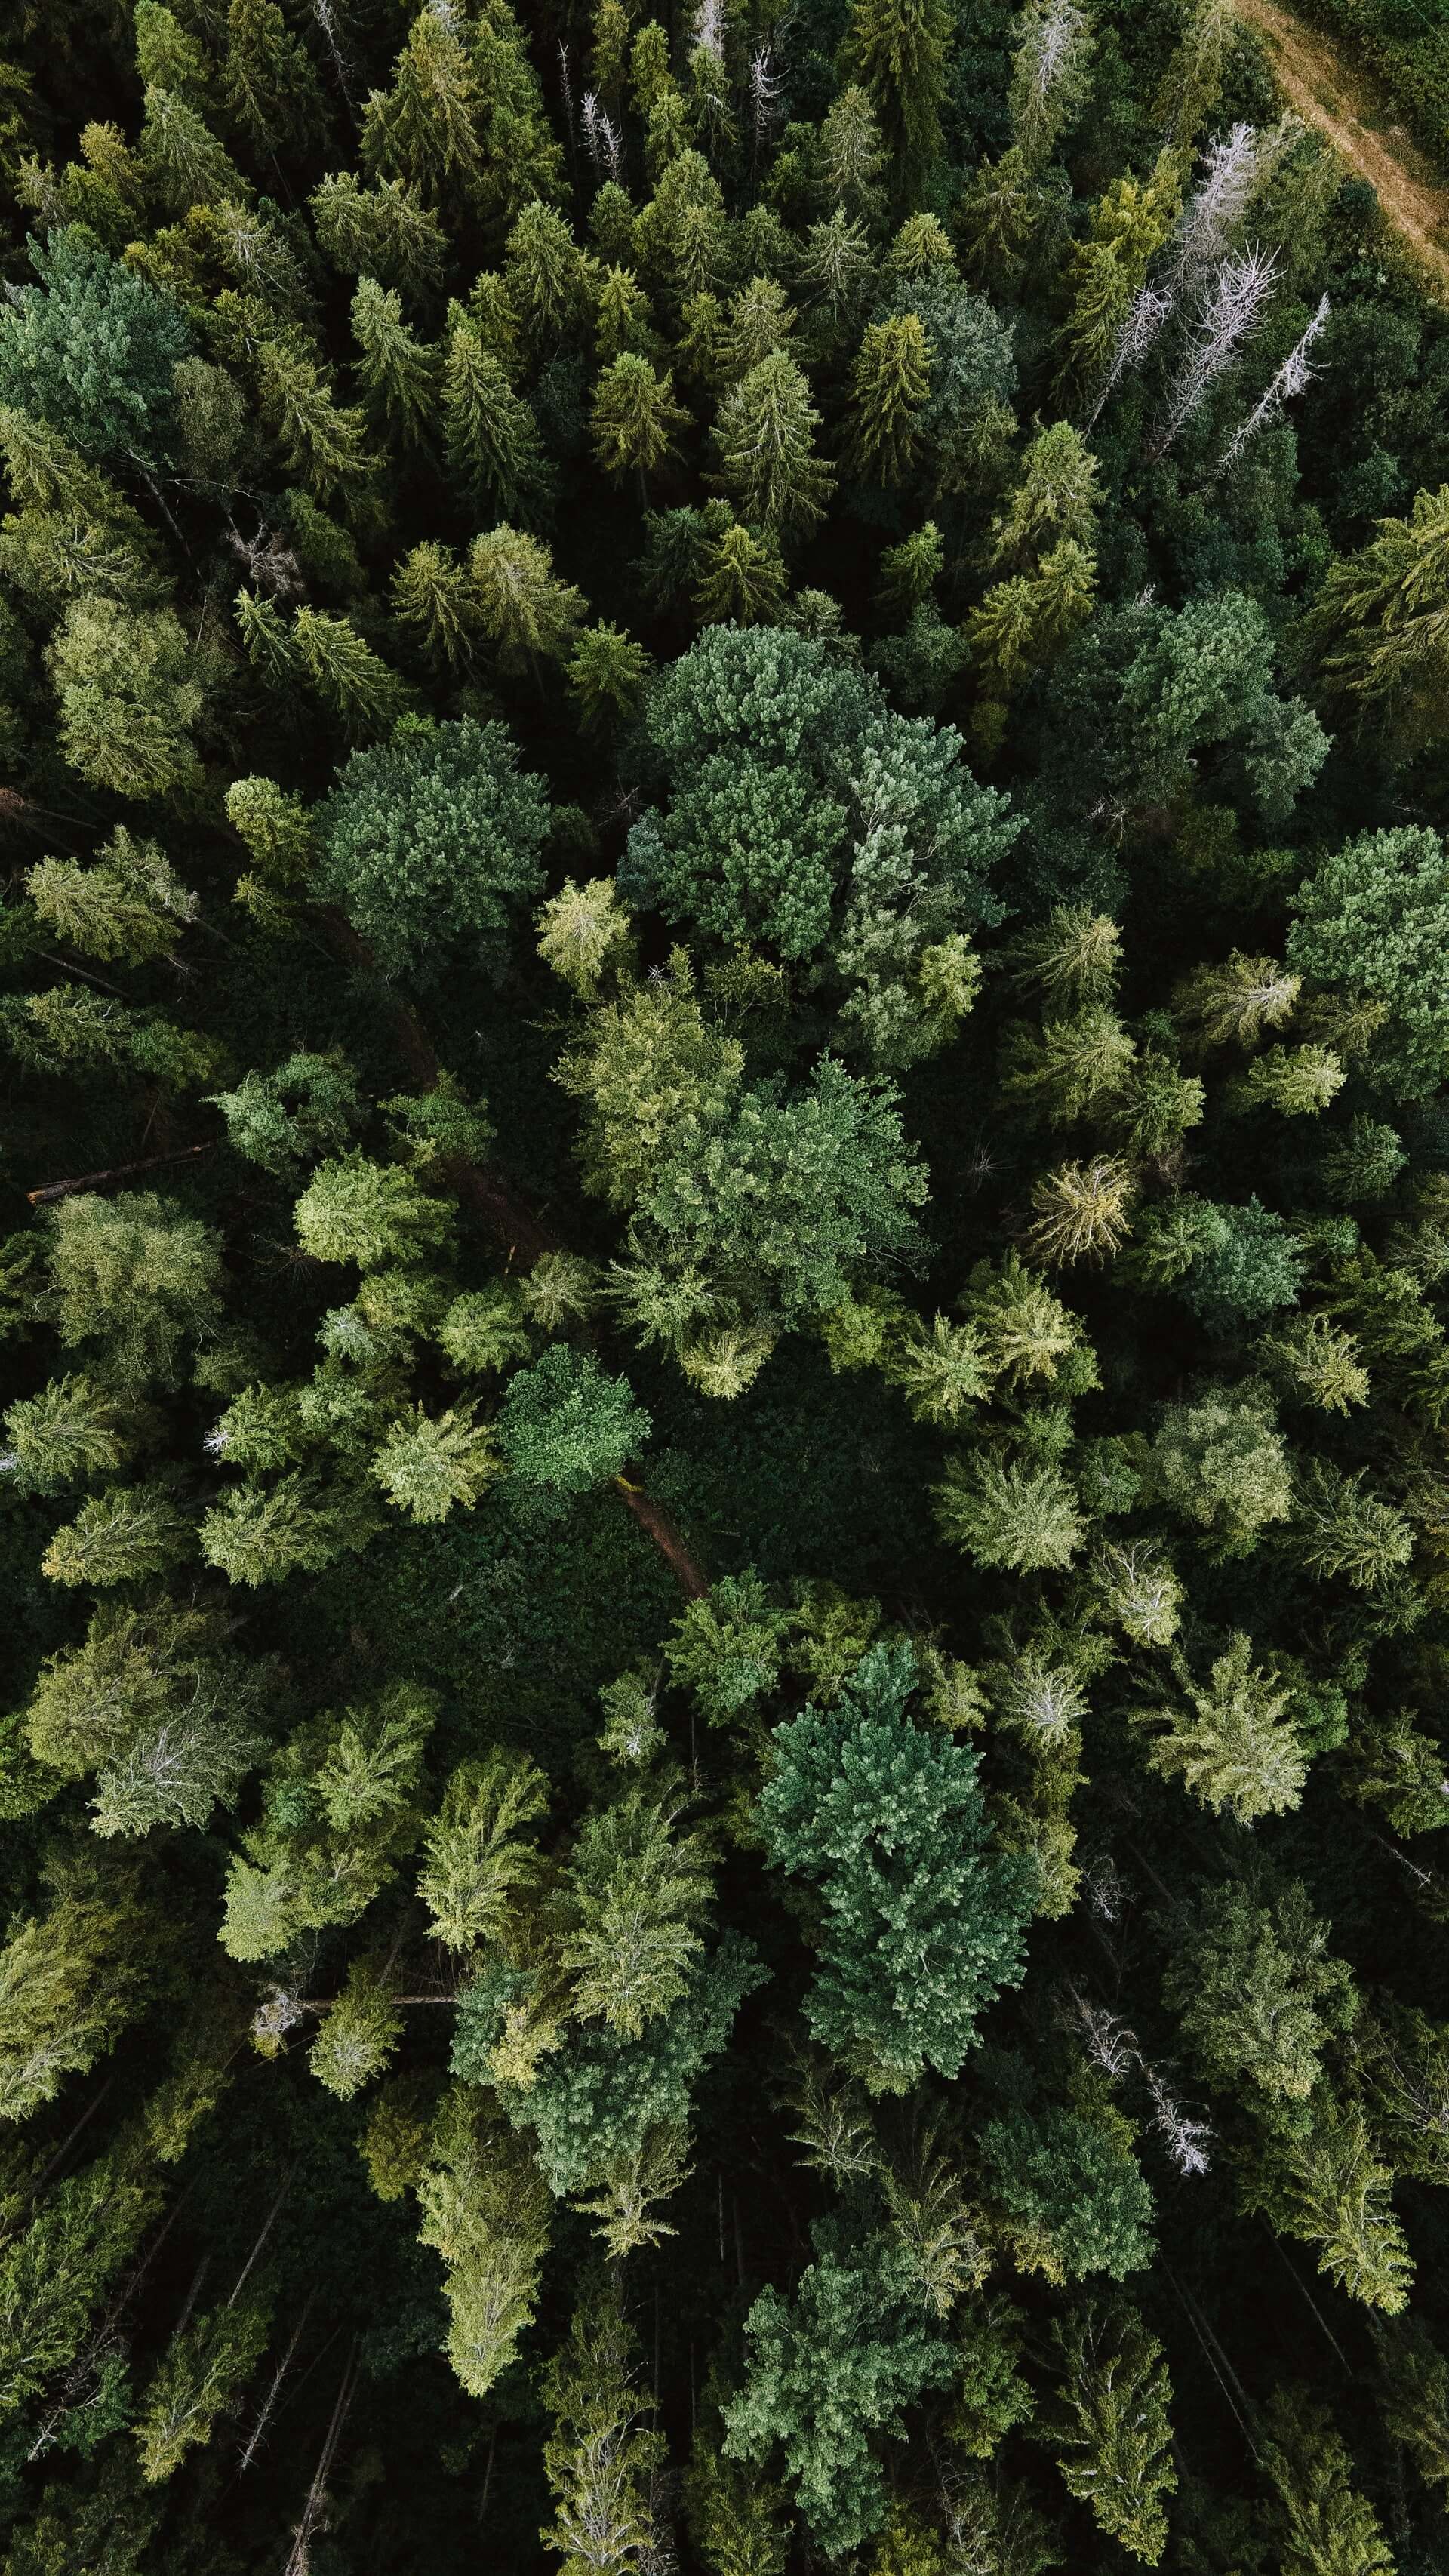 Overhead view of a pine forest